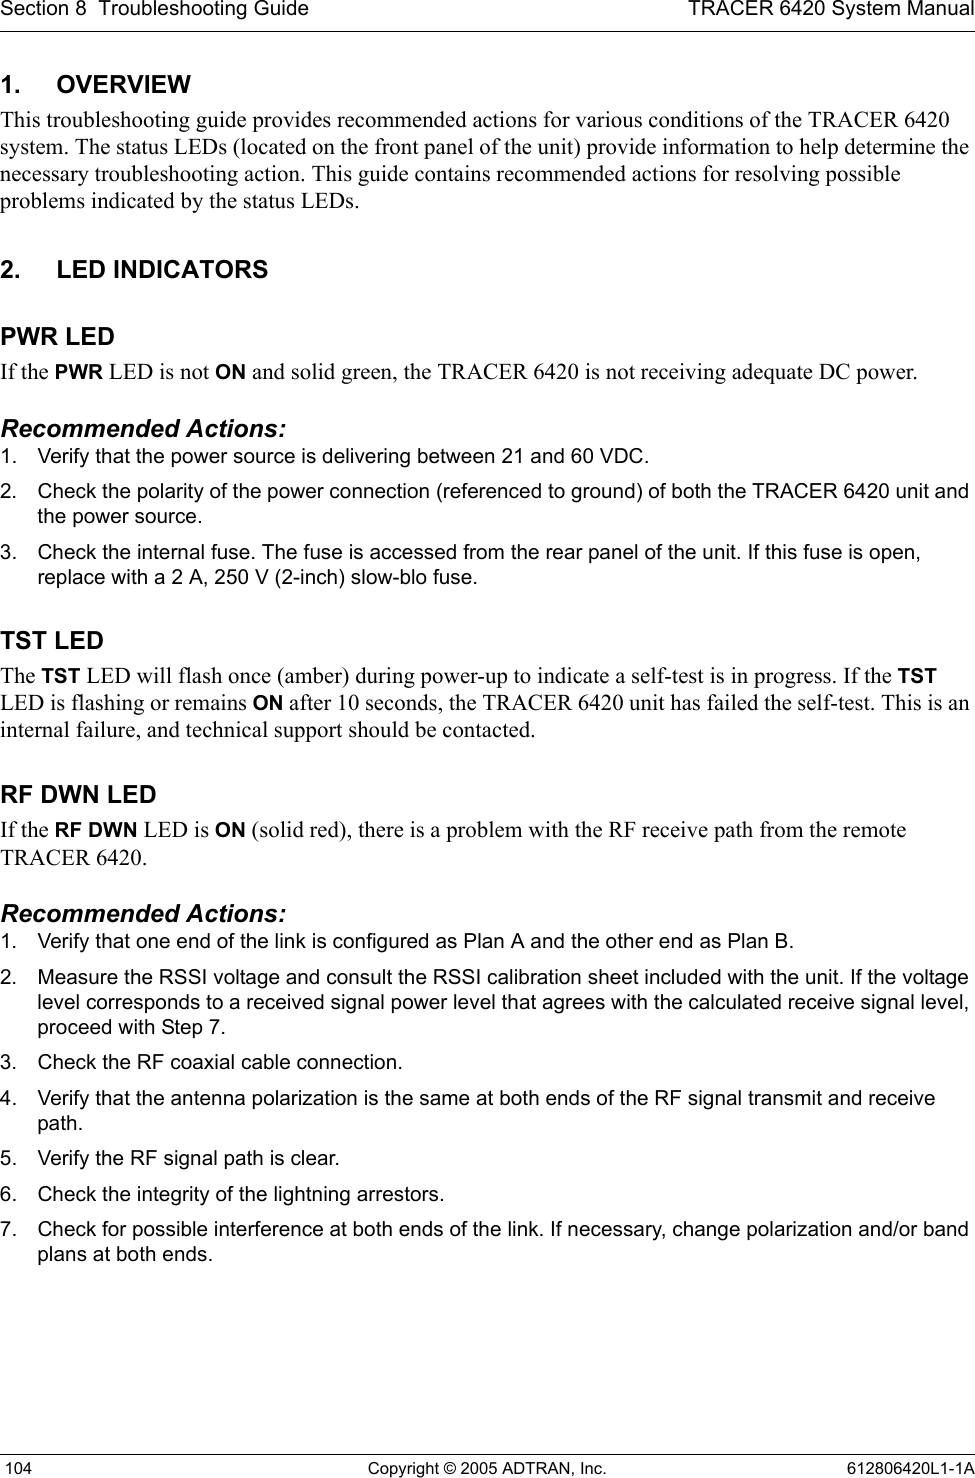 Section 8  Troubleshooting Guide TRACER 6420 System Manual 104 Copyright © 2005 ADTRAN, Inc. 612806420L1-1A1. OVERVIEWThis troubleshooting guide provides recommended actions for various conditions of the TRACER 6420 system. The status LEDs (located on the front panel of the unit) provide information to help determine the necessary troubleshooting action. This guide contains recommended actions for resolving possible problems indicated by the status LEDs.2. LED INDICATORSPWR LEDIf the PWR LED is not ON and solid green, the TRACER 6420 is not receiving adequate DC power. Recommended Actions:1. Verify that the power source is delivering between 21 and 60 VDC.2. Check the polarity of the power connection (referenced to ground) of both the TRACER 6420 unit and the power source.3. Check the internal fuse. The fuse is accessed from the rear panel of the unit. If this fuse is open, replace with a 2 A, 250 V (2-inch) slow-blo fuse.TST LEDThe TST LED will flash once (amber) during power-up to indicate a self-test is in progress. If the TST LED is flashing or remains ON after 10 seconds, the TRACER 6420 unit has failed the self-test. This is an internal failure, and technical support should be contacted.RF DWN LEDIf the RF DWN LED is ON (solid red), there is a problem with the RF receive path from the remote TRACER 6420.Recommended Actions:1. Verify that one end of the link is configured as Plan A and the other end as Plan B.2. Measure the RSSI voltage and consult the RSSI calibration sheet included with the unit. If the voltage level corresponds to a received signal power level that agrees with the calculated receive signal level, proceed with Step 7.3. Check the RF coaxial cable connection.4. Verify that the antenna polarization is the same at both ends of the RF signal transmit and receive path.5. Verify the RF signal path is clear.6. Check the integrity of the lightning arrestors.7. Check for possible interference at both ends of the link. If necessary, change polarization and/or band plans at both ends.